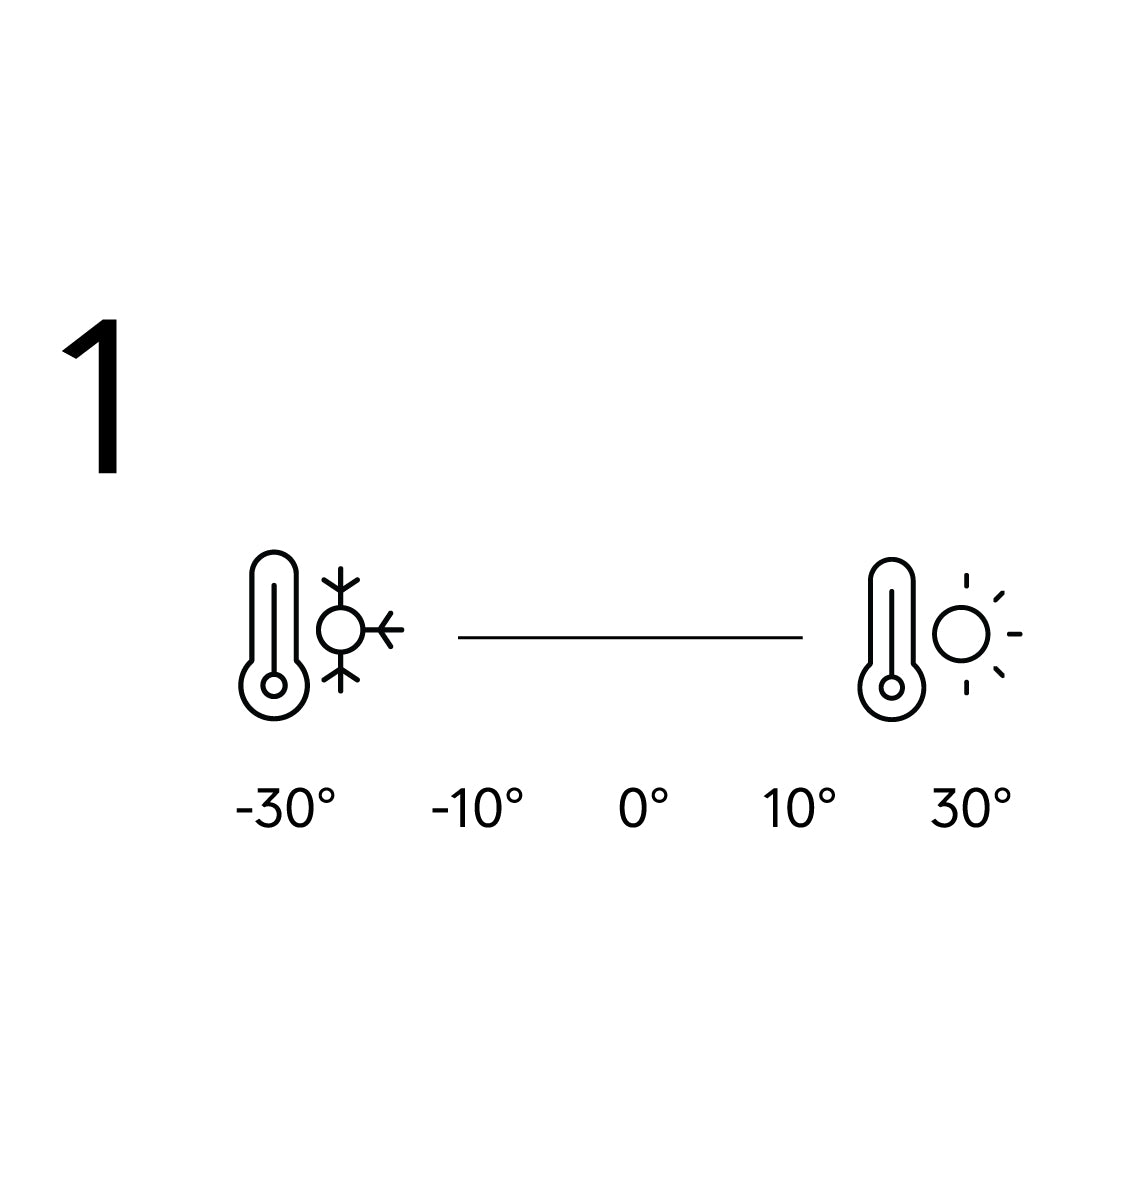 In what temperature will you exercise?